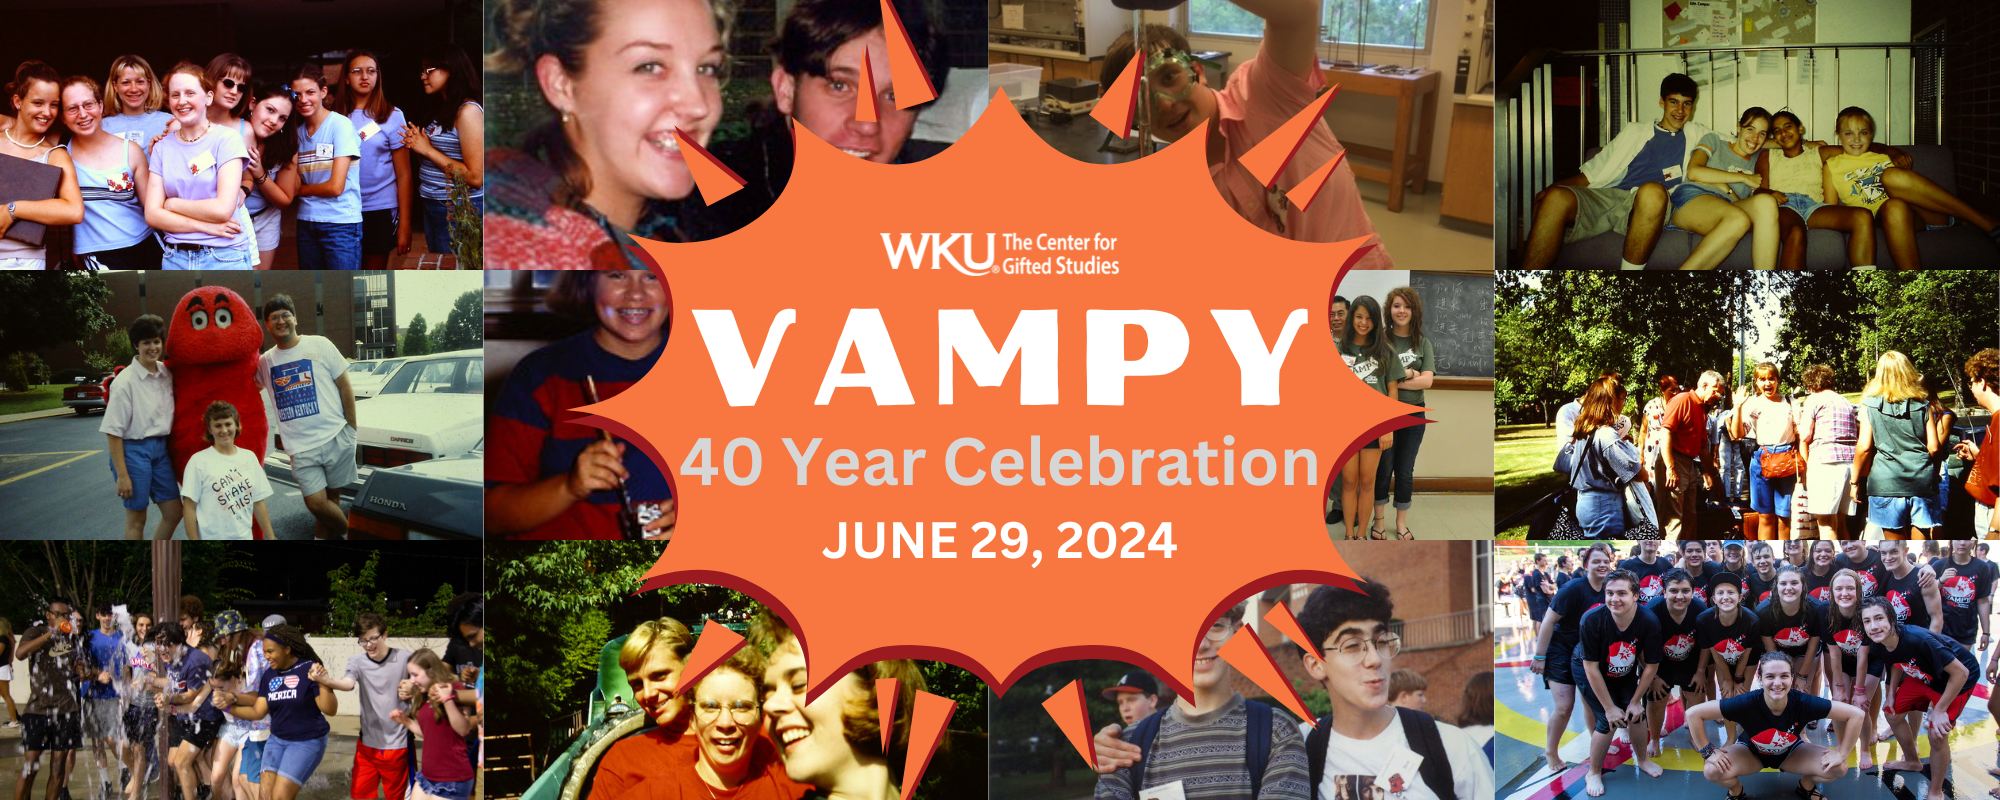 header image with old photos of campers at VAMPY advertising the 40th celebration on June 29